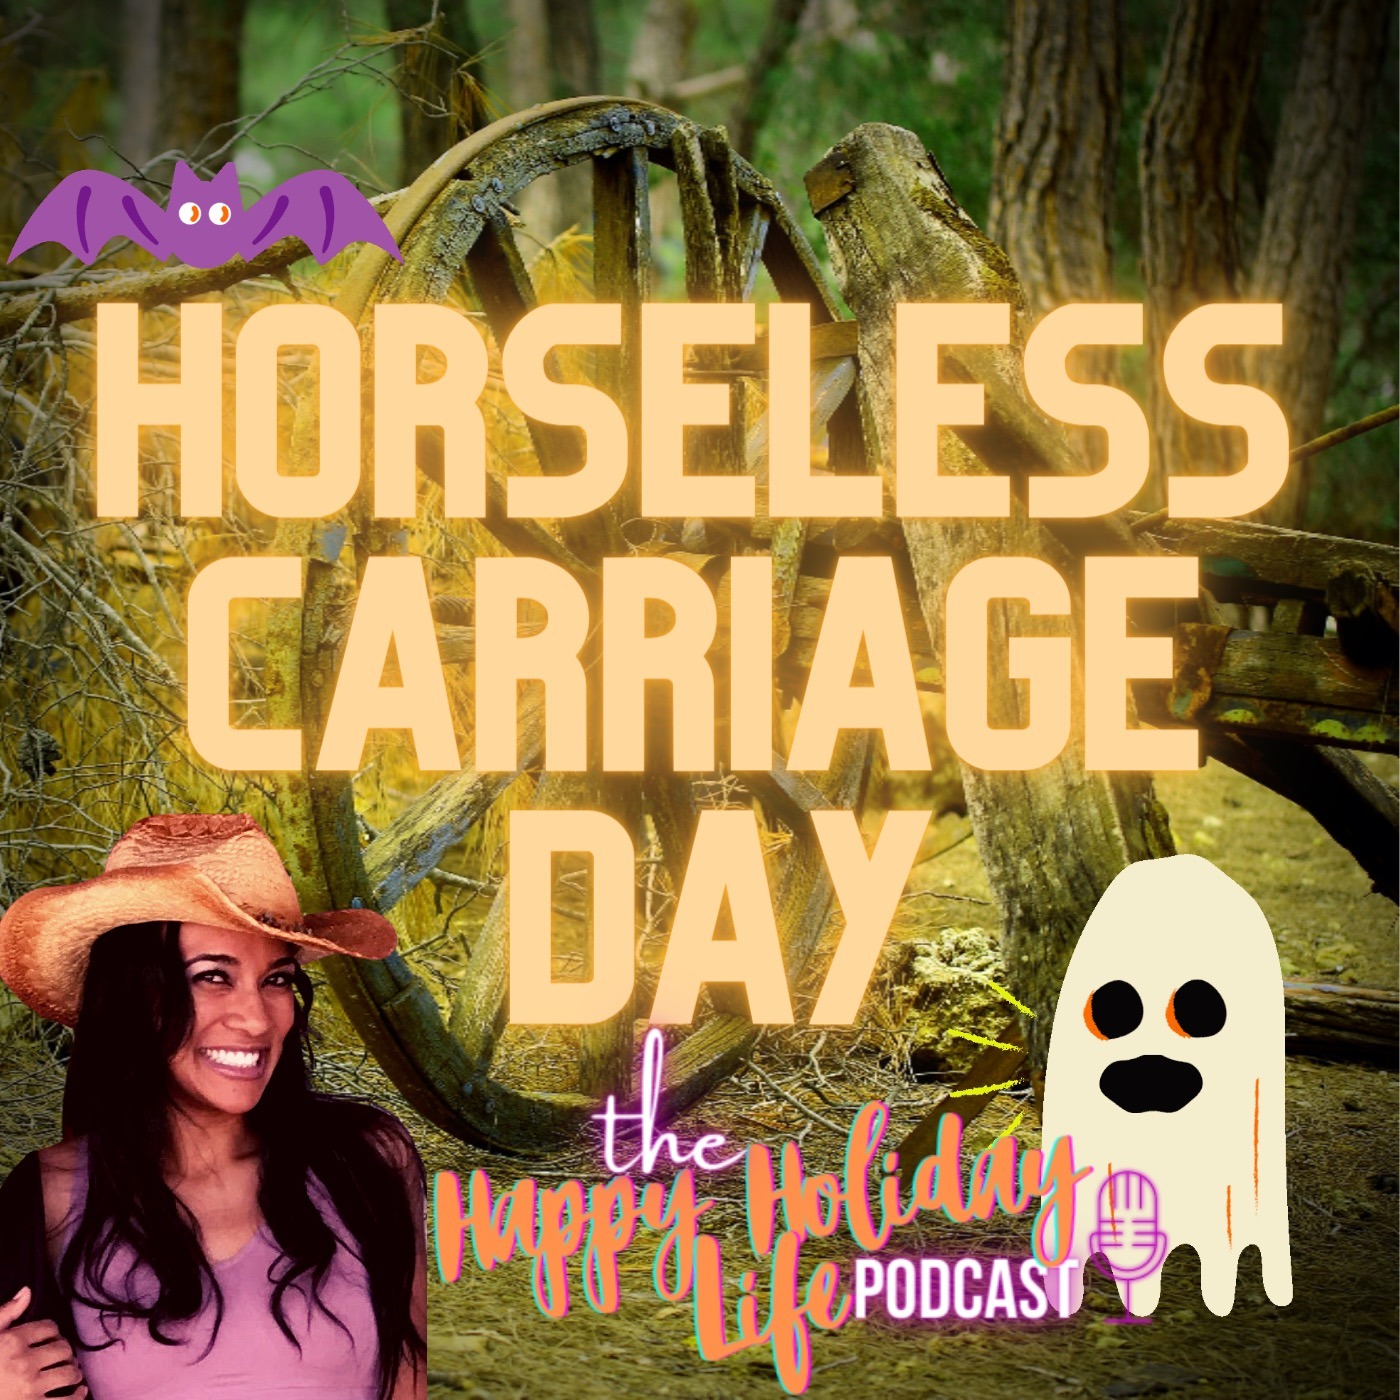 Episode #009 Horseless Carriage Day! Image